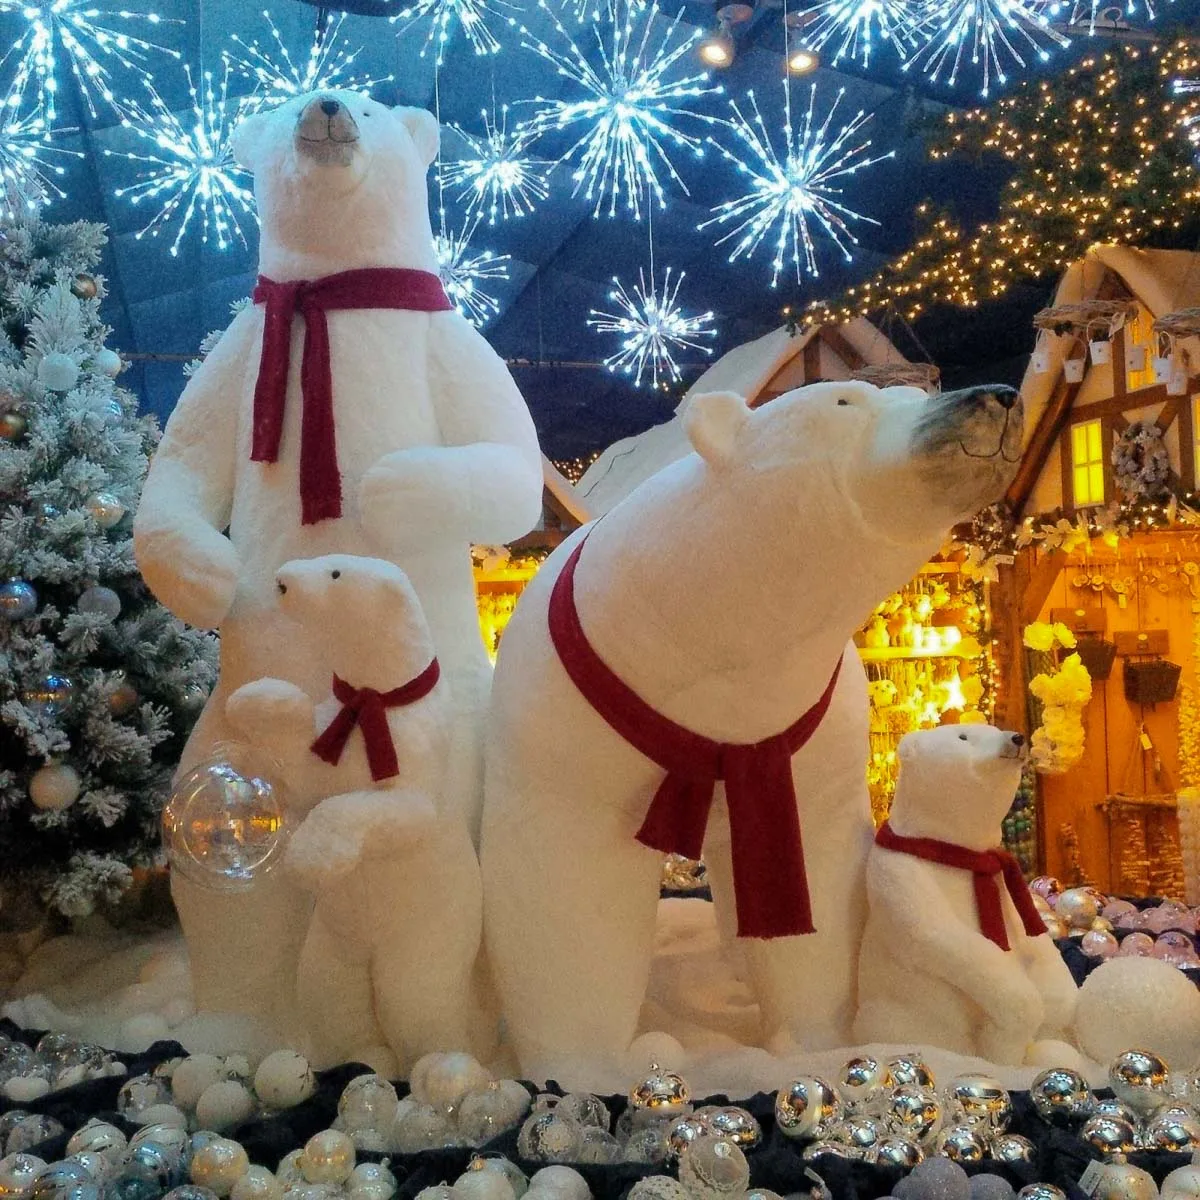 A Christmas display of polar bears - Vicenza, Italy - rossiwrites.com